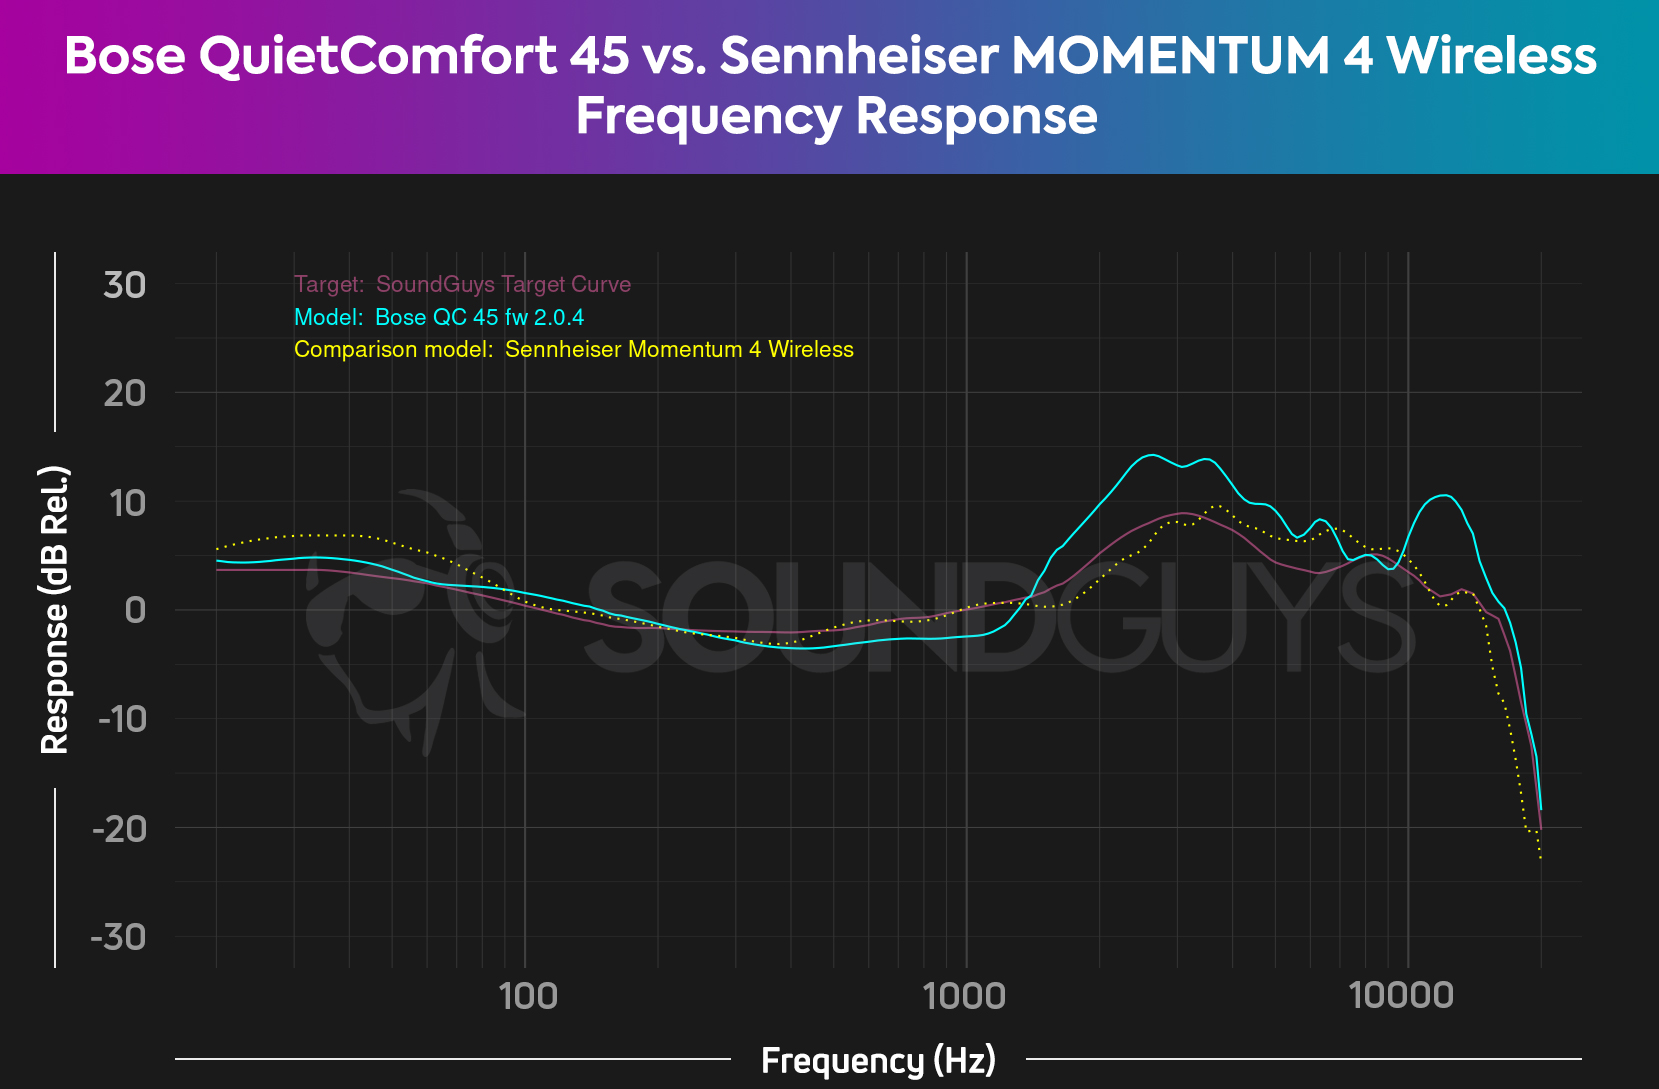 The Sennheiser MOMENTUM 4 Wireless has less emphasis in the highs, adhering to the SoundGuys consumer curve better than the Bose QuietComfort 45 does.